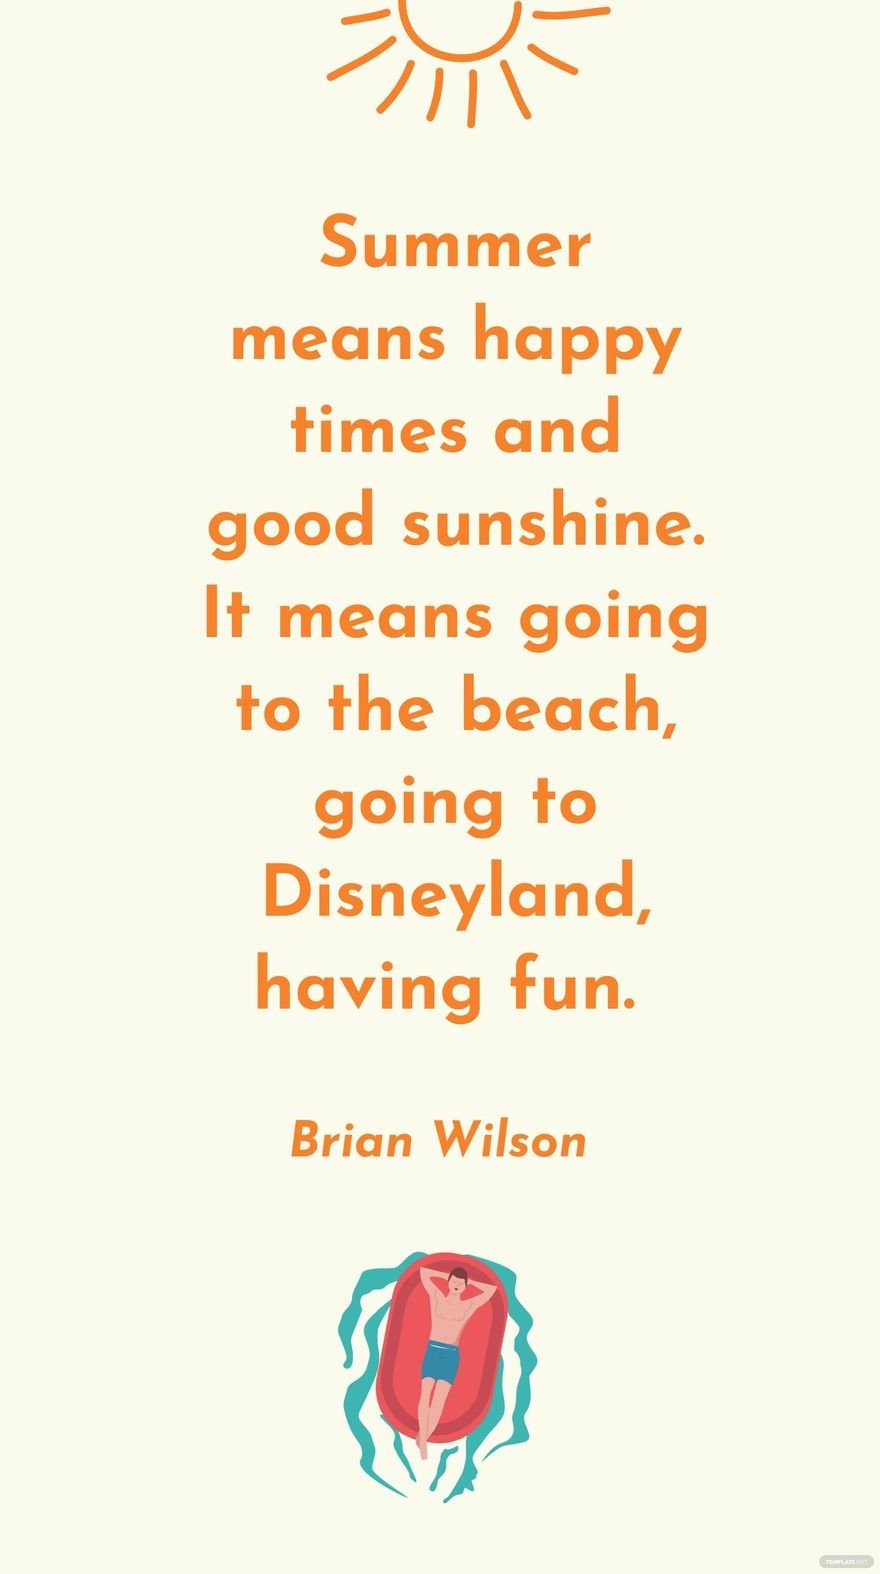 Brian Wilson - Summer means happy times and good sunshine. It means going to the beach, going to Disneyland, having fun.